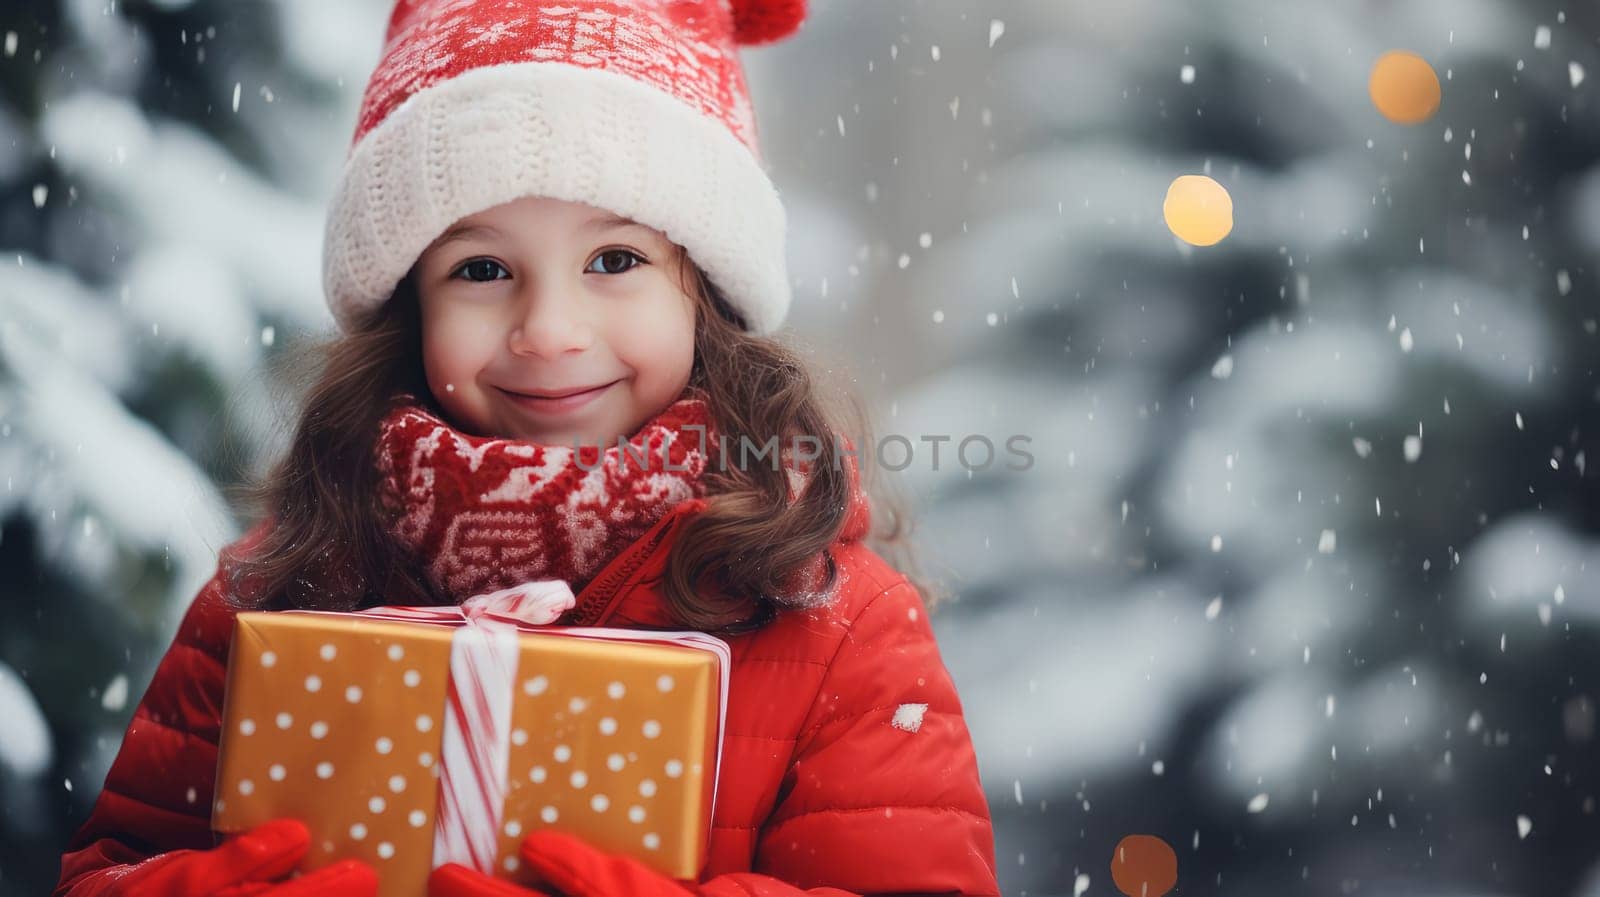 Pretty smiling girl, child in red jacket and hat holding Christmas gifts while standing against background of decorated Christmas tree outdoors on snowy day of winter holidays.